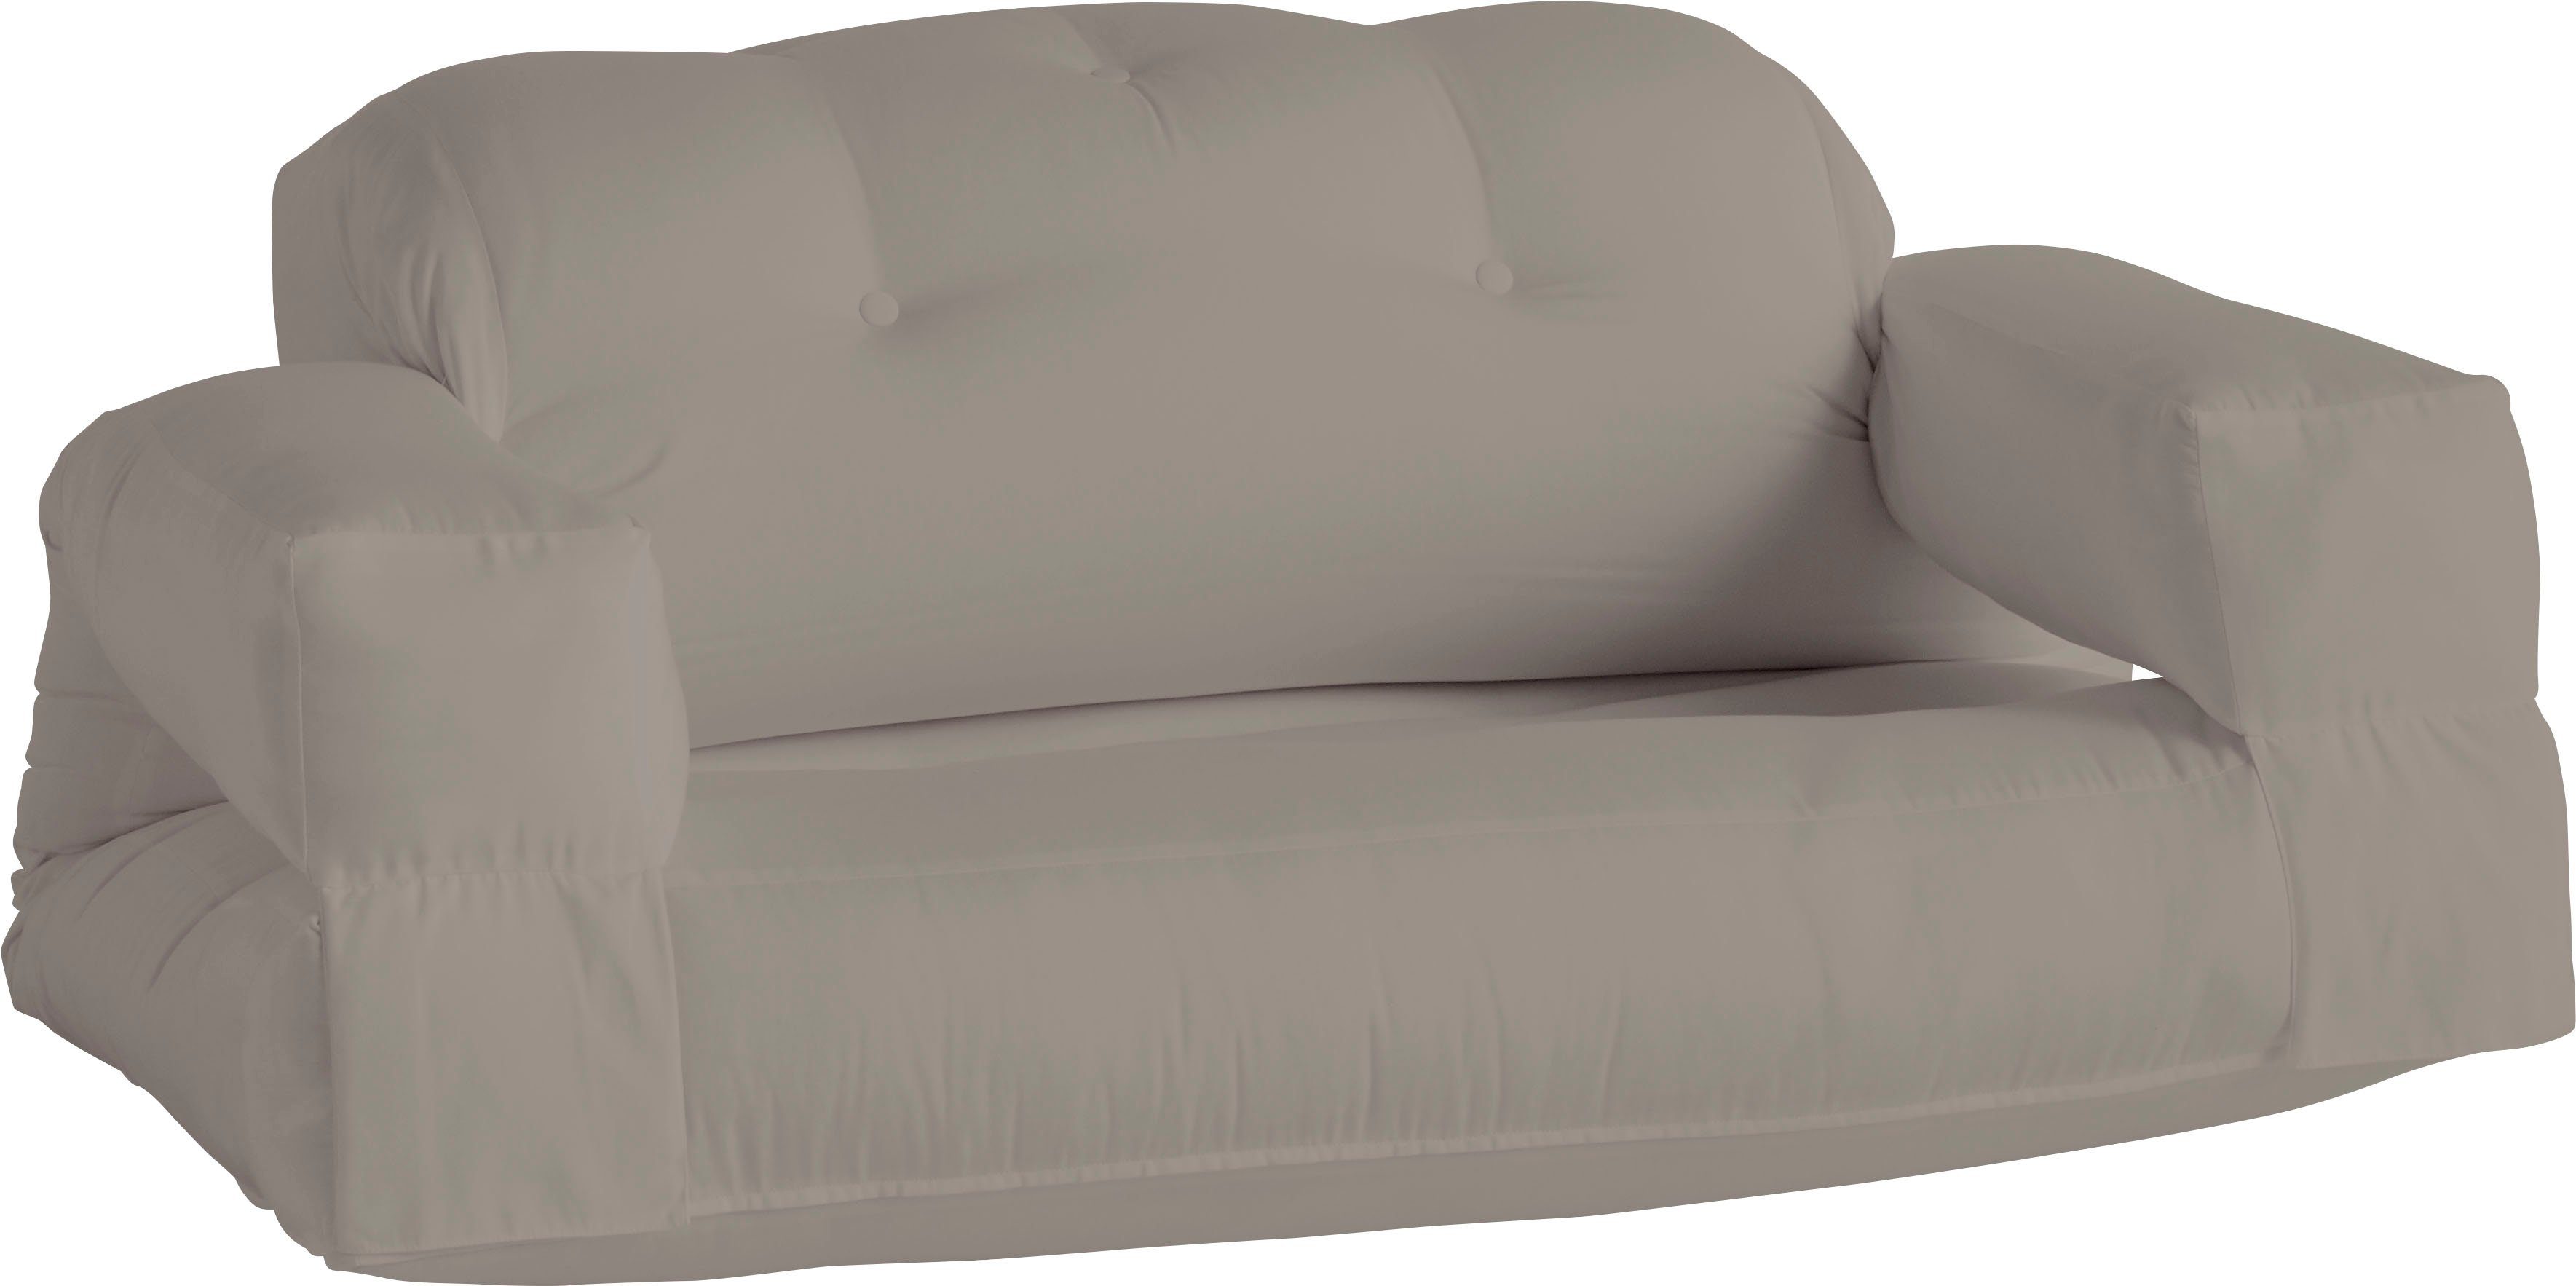 Karup Design Loungesofa Hippo, OUT beige